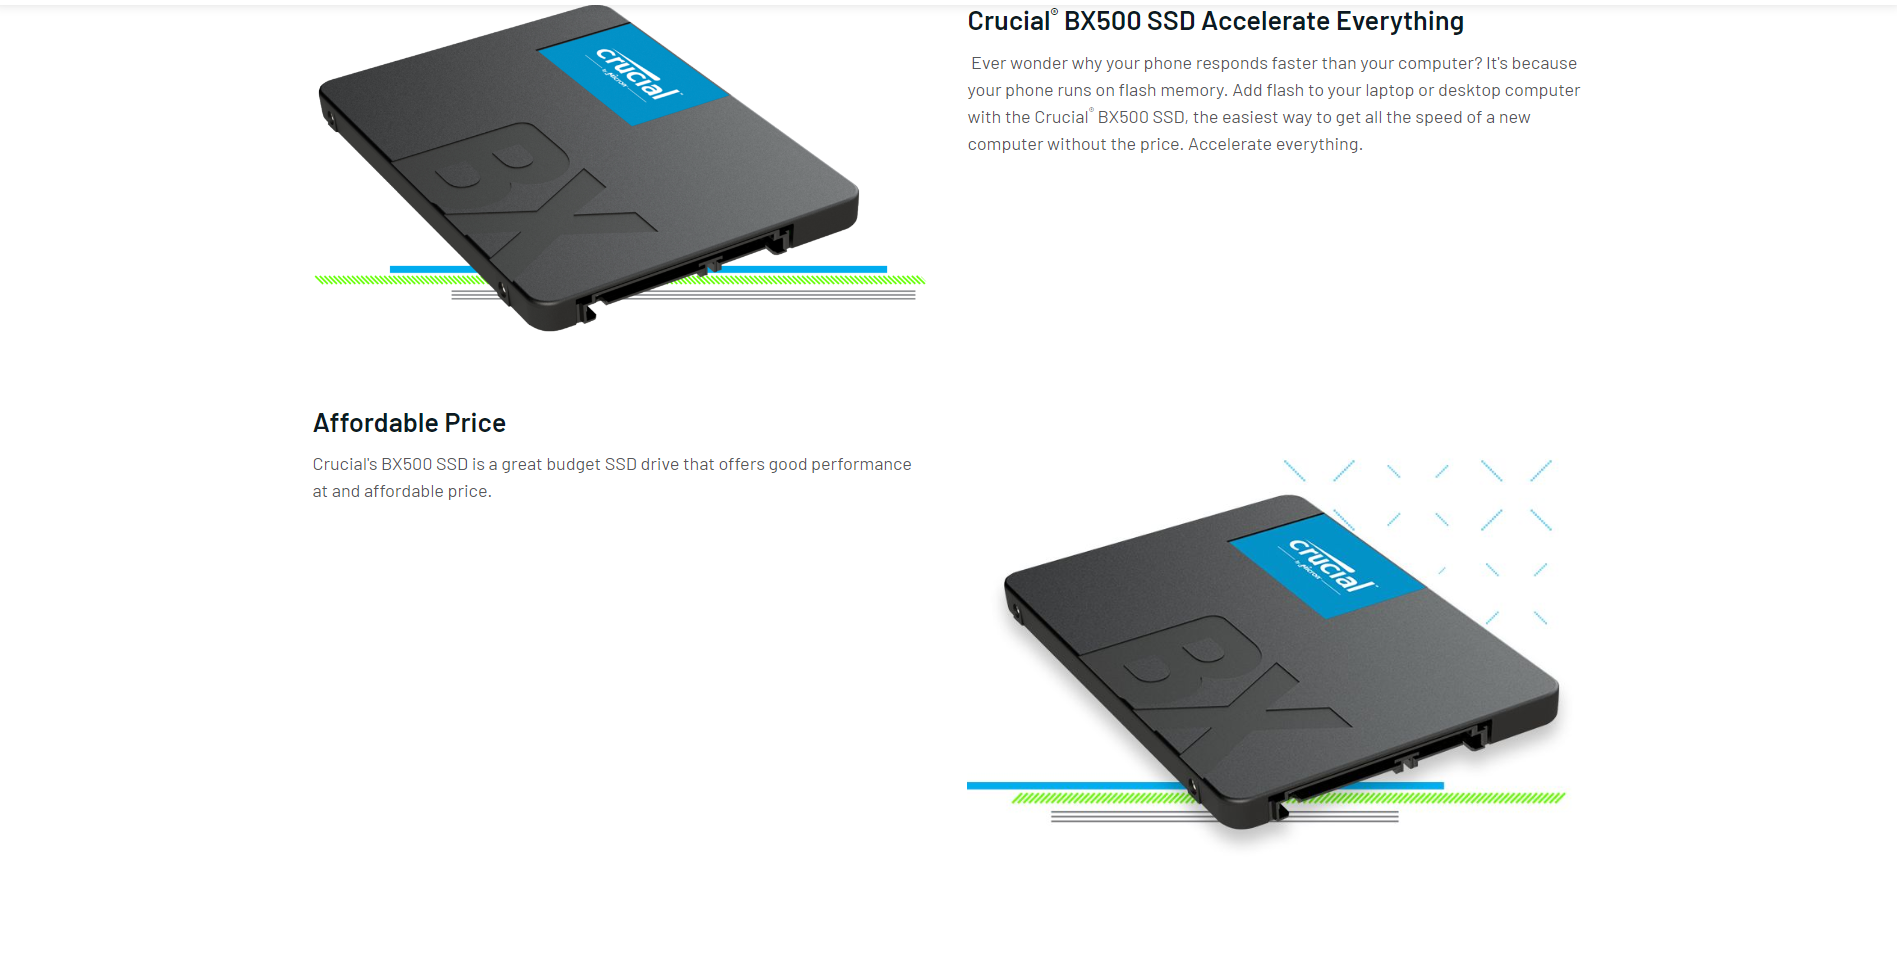 Buy the Crucial BX500 CT240BX500SSD1 Solid State Drive - Drive Solutions